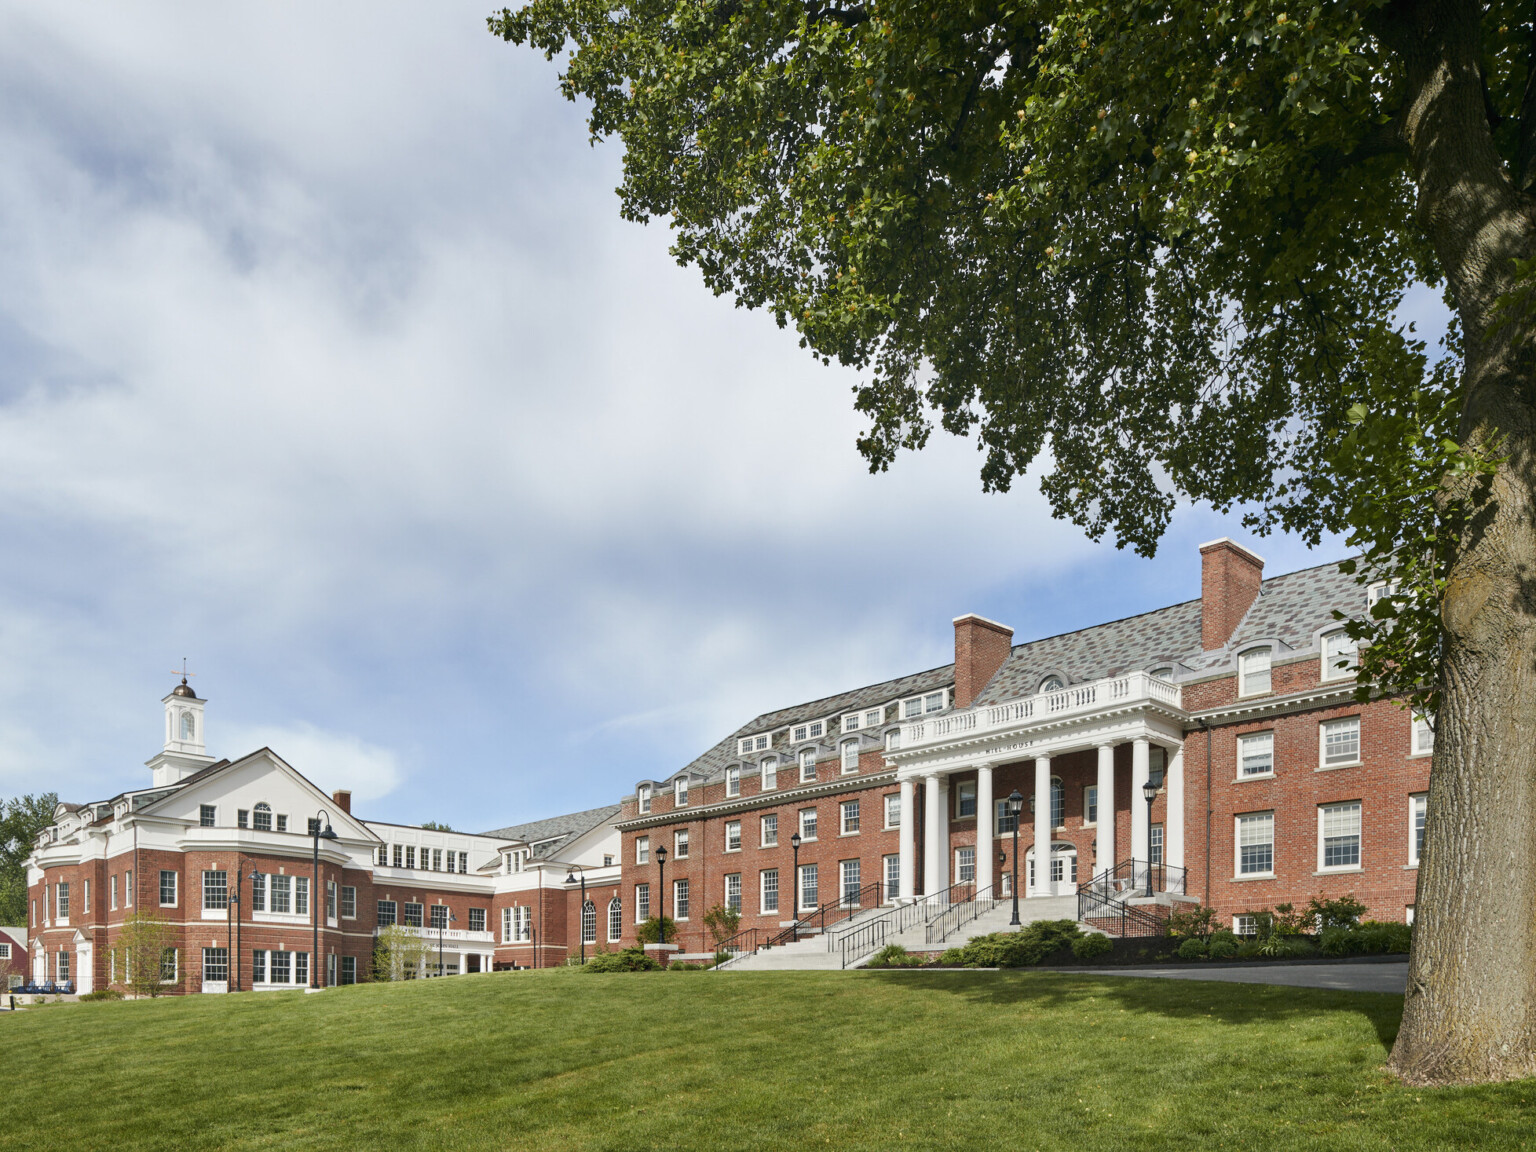 Exterior of Georgian Colonial Revival three story brick and white classical looking boarding school building with manicured lawn